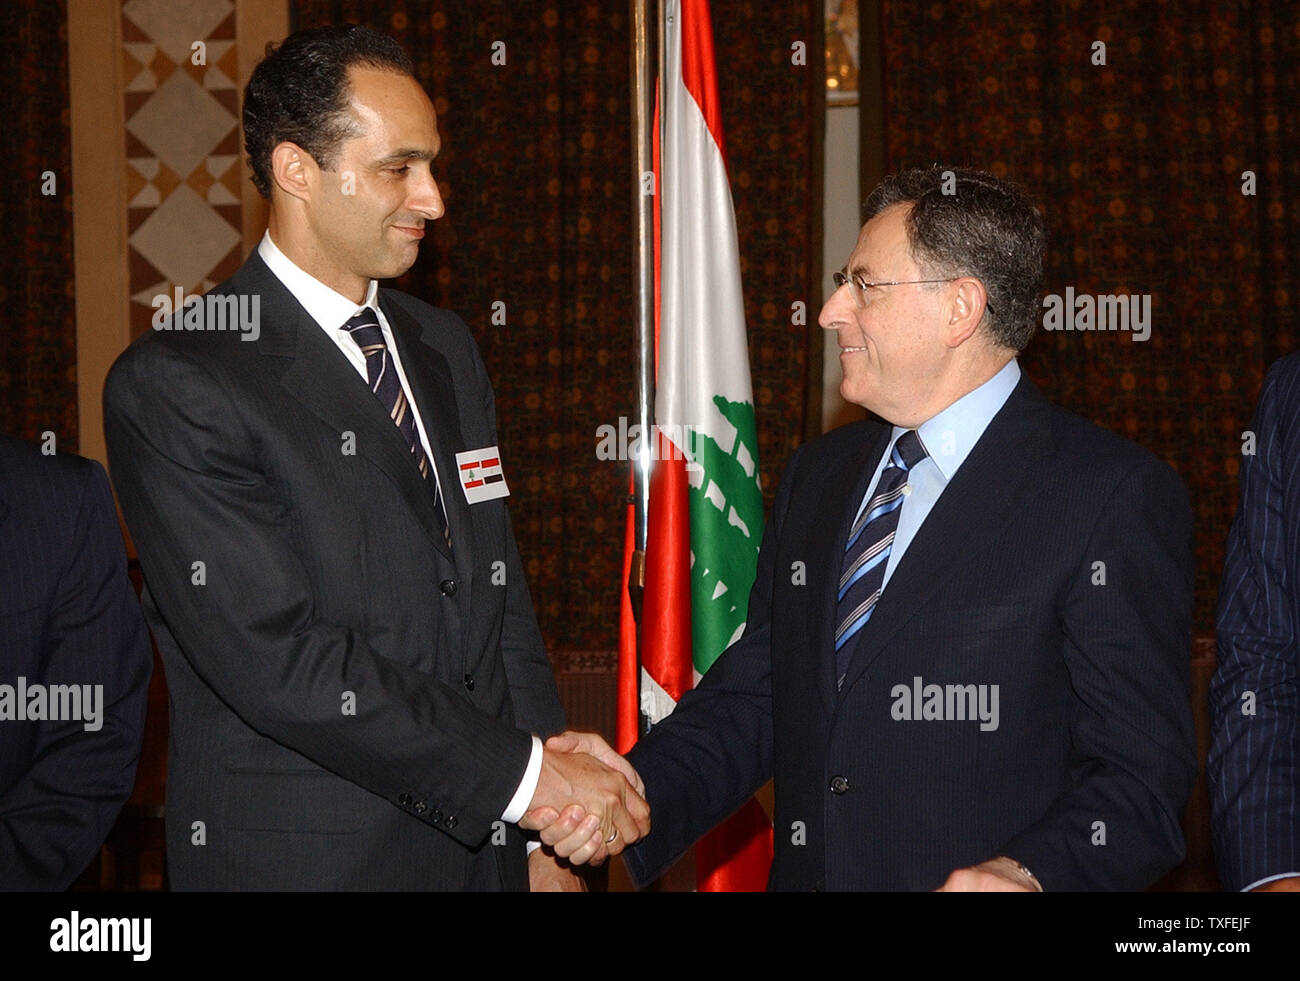 Gamal Mubarak (left), the son of Egyptian President Hosni Mubarak and his possible successor, meets with Lebanese Prime Minister Fouad Saniora in Beirut on August 8, 2006. Mubarak is wearing both the Lebanese and Egyptian flags on his lapel and is visiting Lebanon to show Egyptian solidarity with the Lebanese people. (UPI Photo) Stock Photo